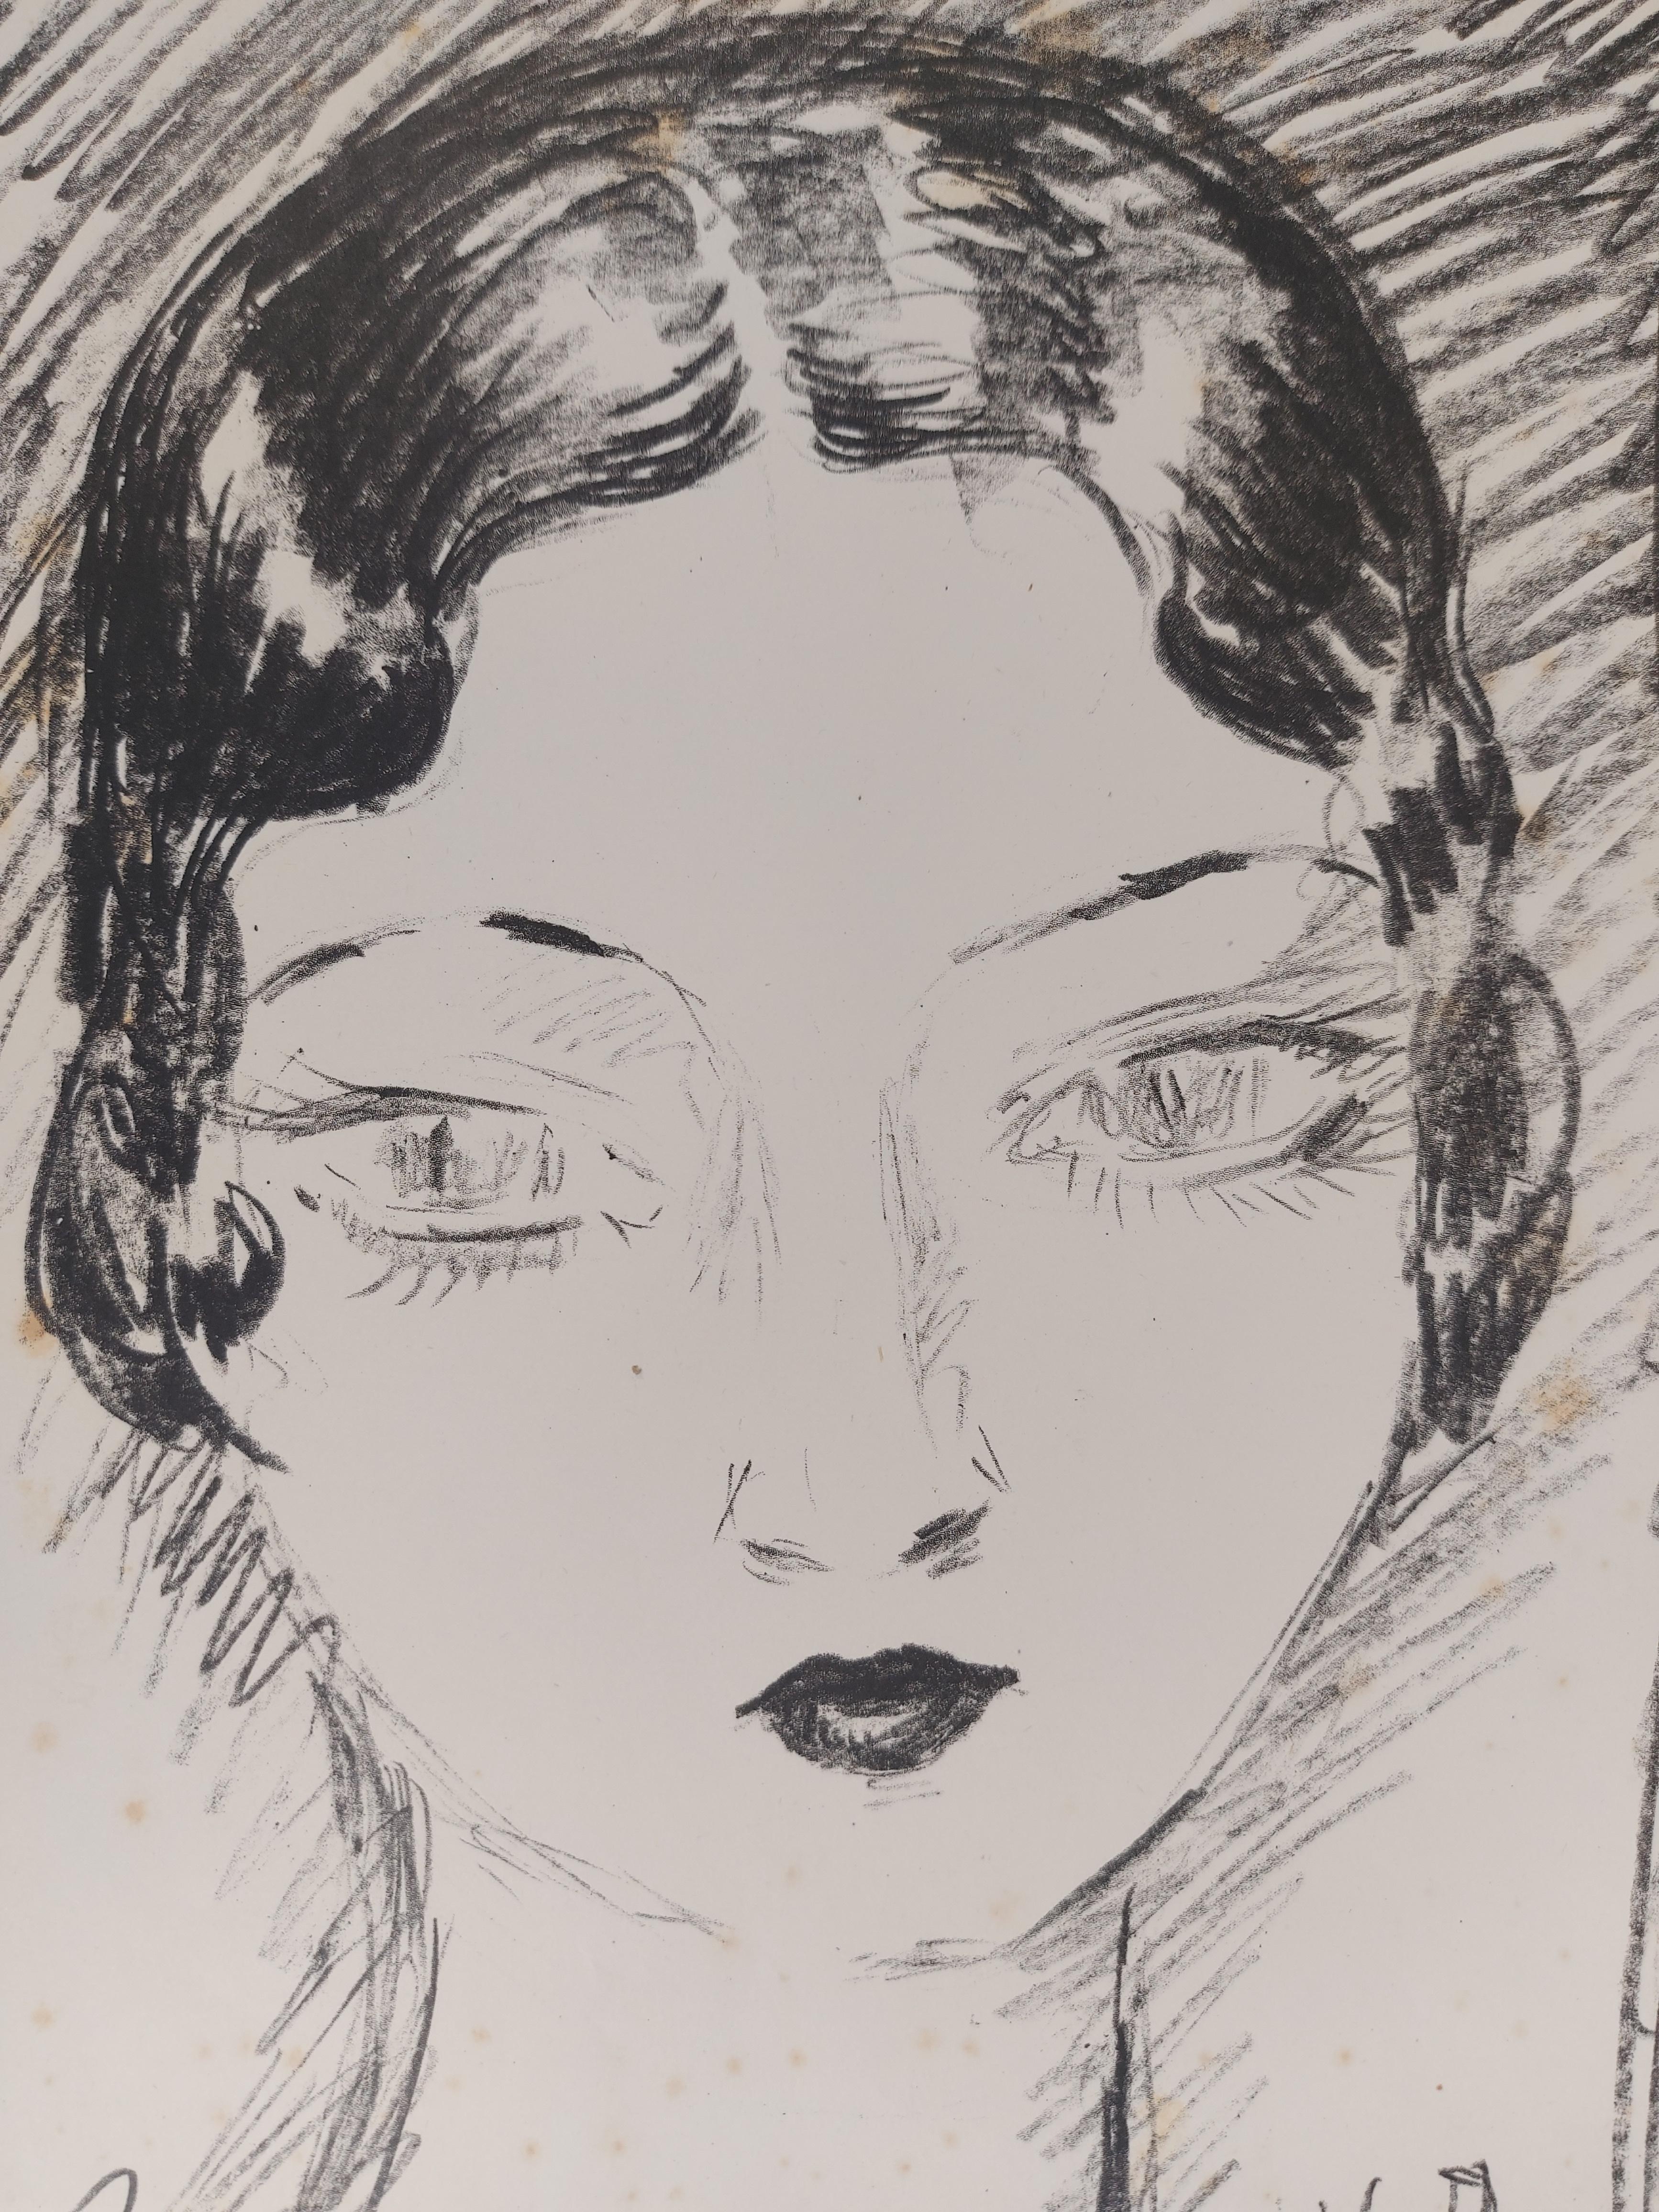 Young Girl with Big Eyes - Original lithograph (Juffermans #JL15) - Print by Kees van Dongen